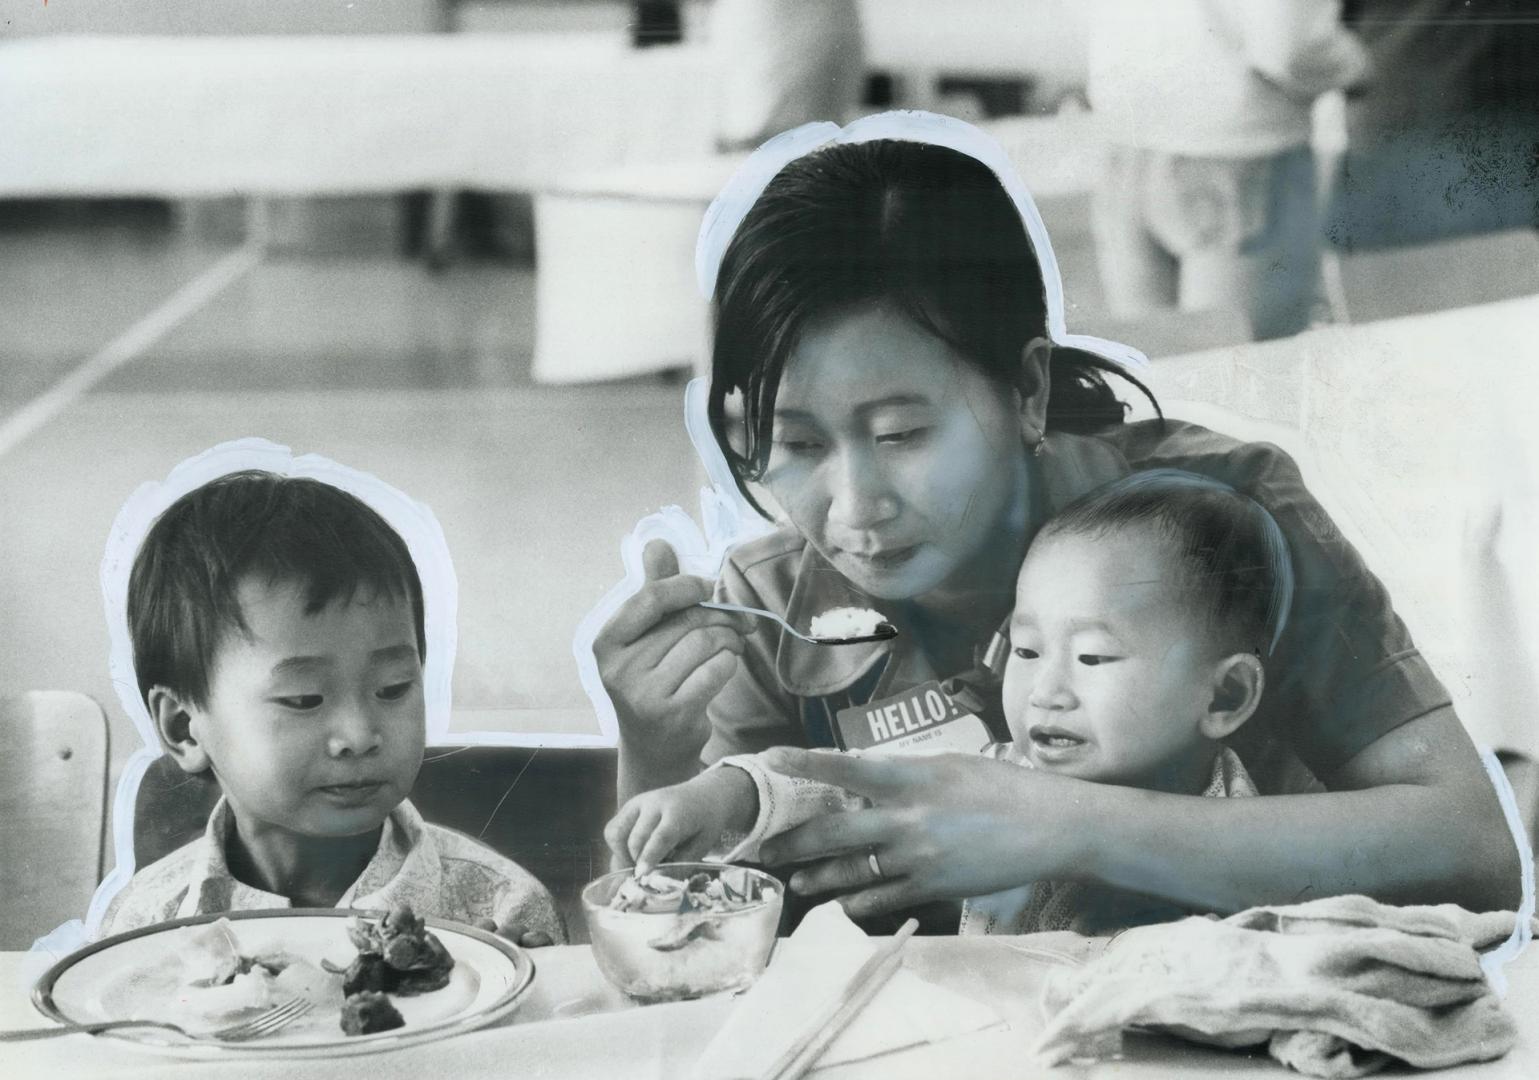 Le Banh, 10, Le Hoa, 13, and Le Binh, 4, watch television, Tran Thi Si helps her sons, Quach Suol, 5, and Quach Sen, 2, with their first Toronto meal